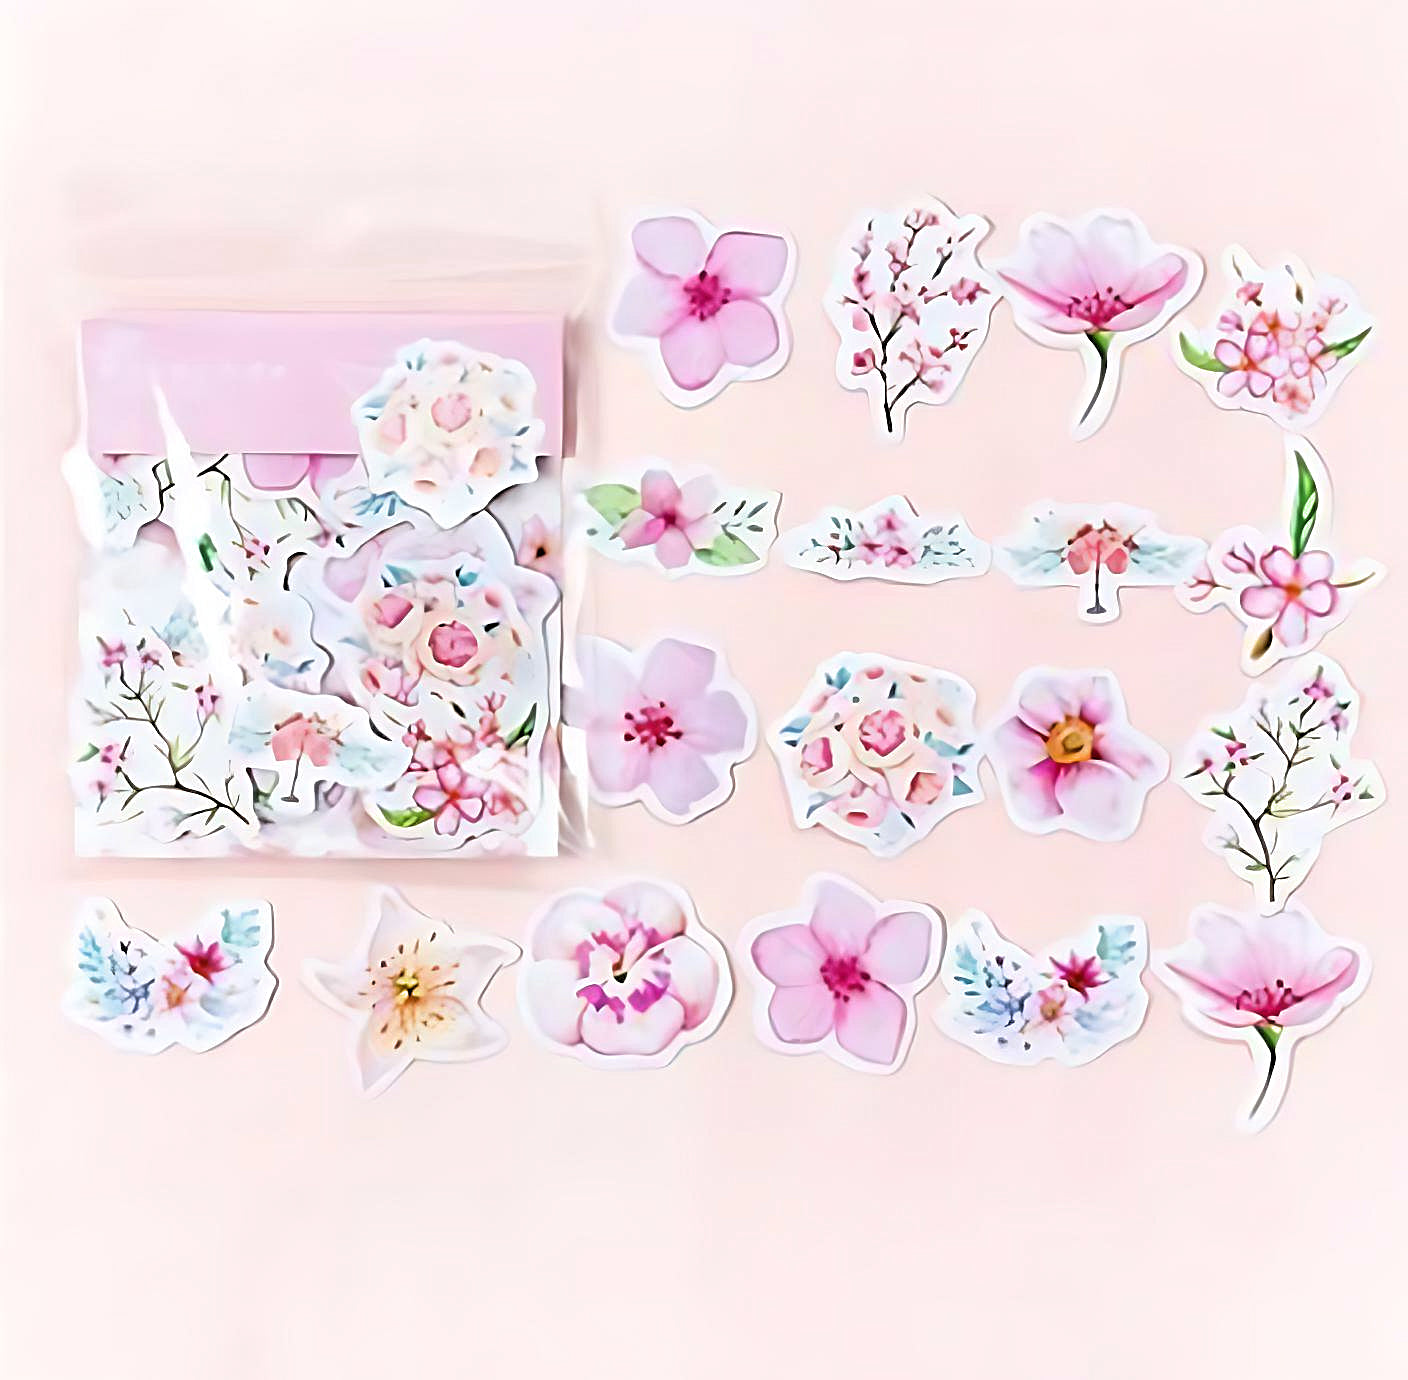 a set of bright flower stickers in pink color